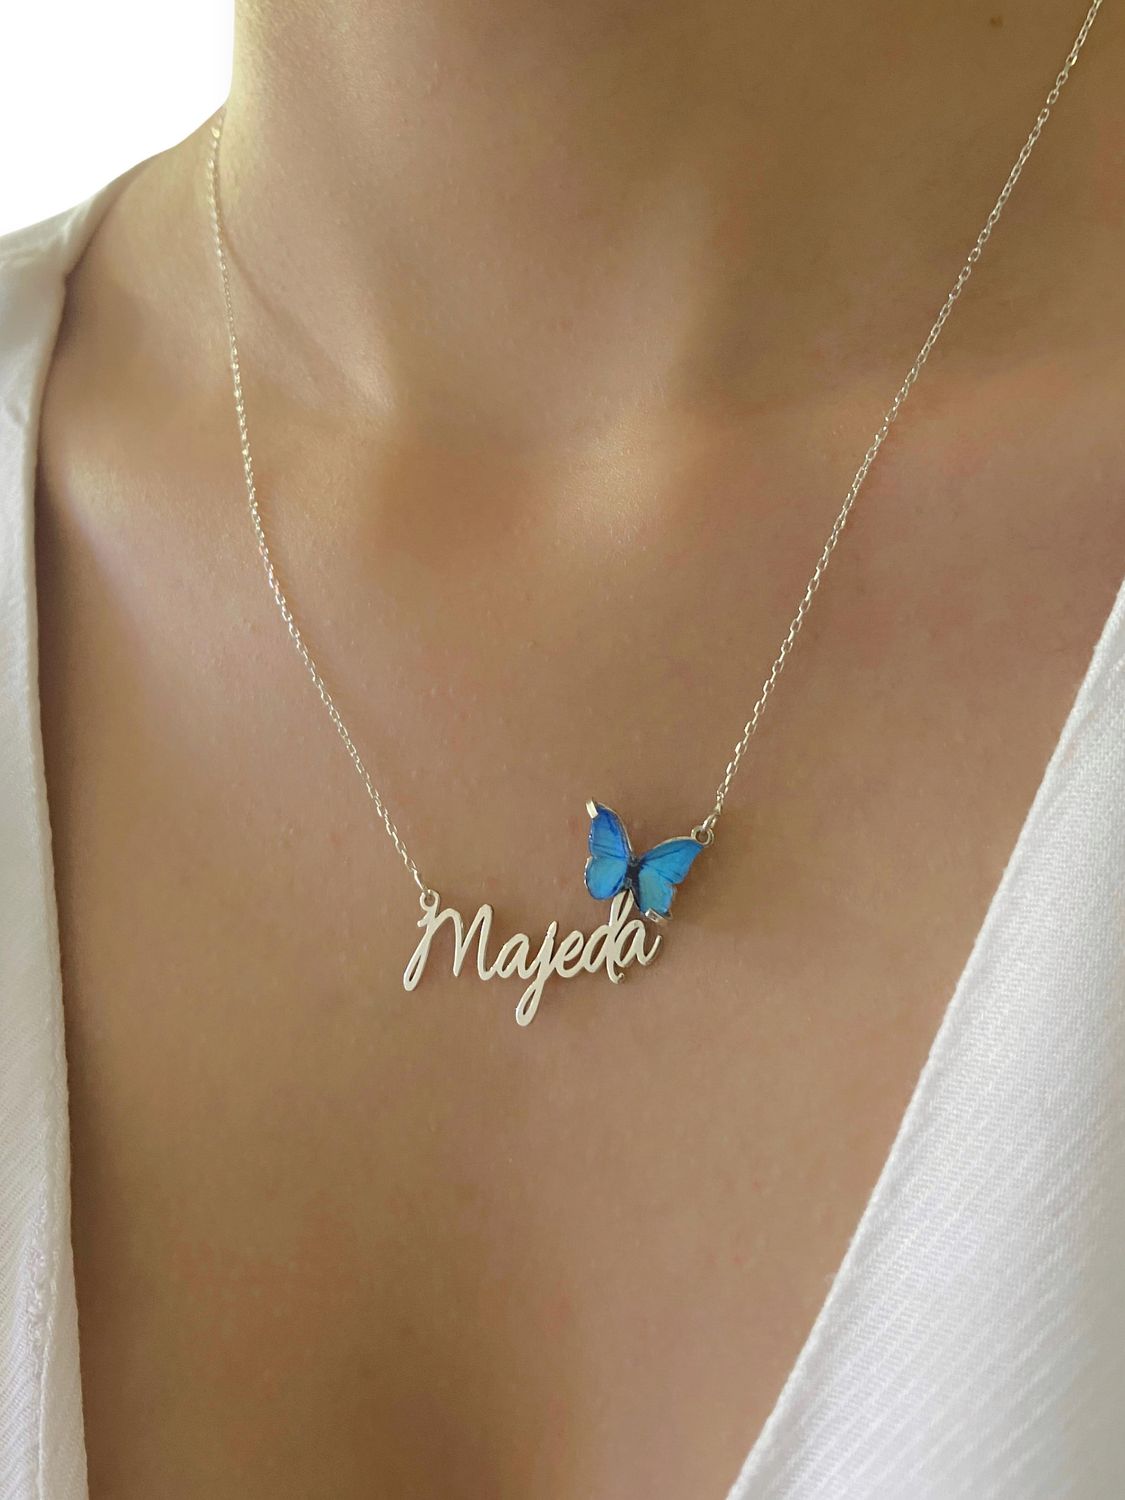 Custom 925 Sterling Silver Necklace with Three Dimensional Realistic Butterfly Name